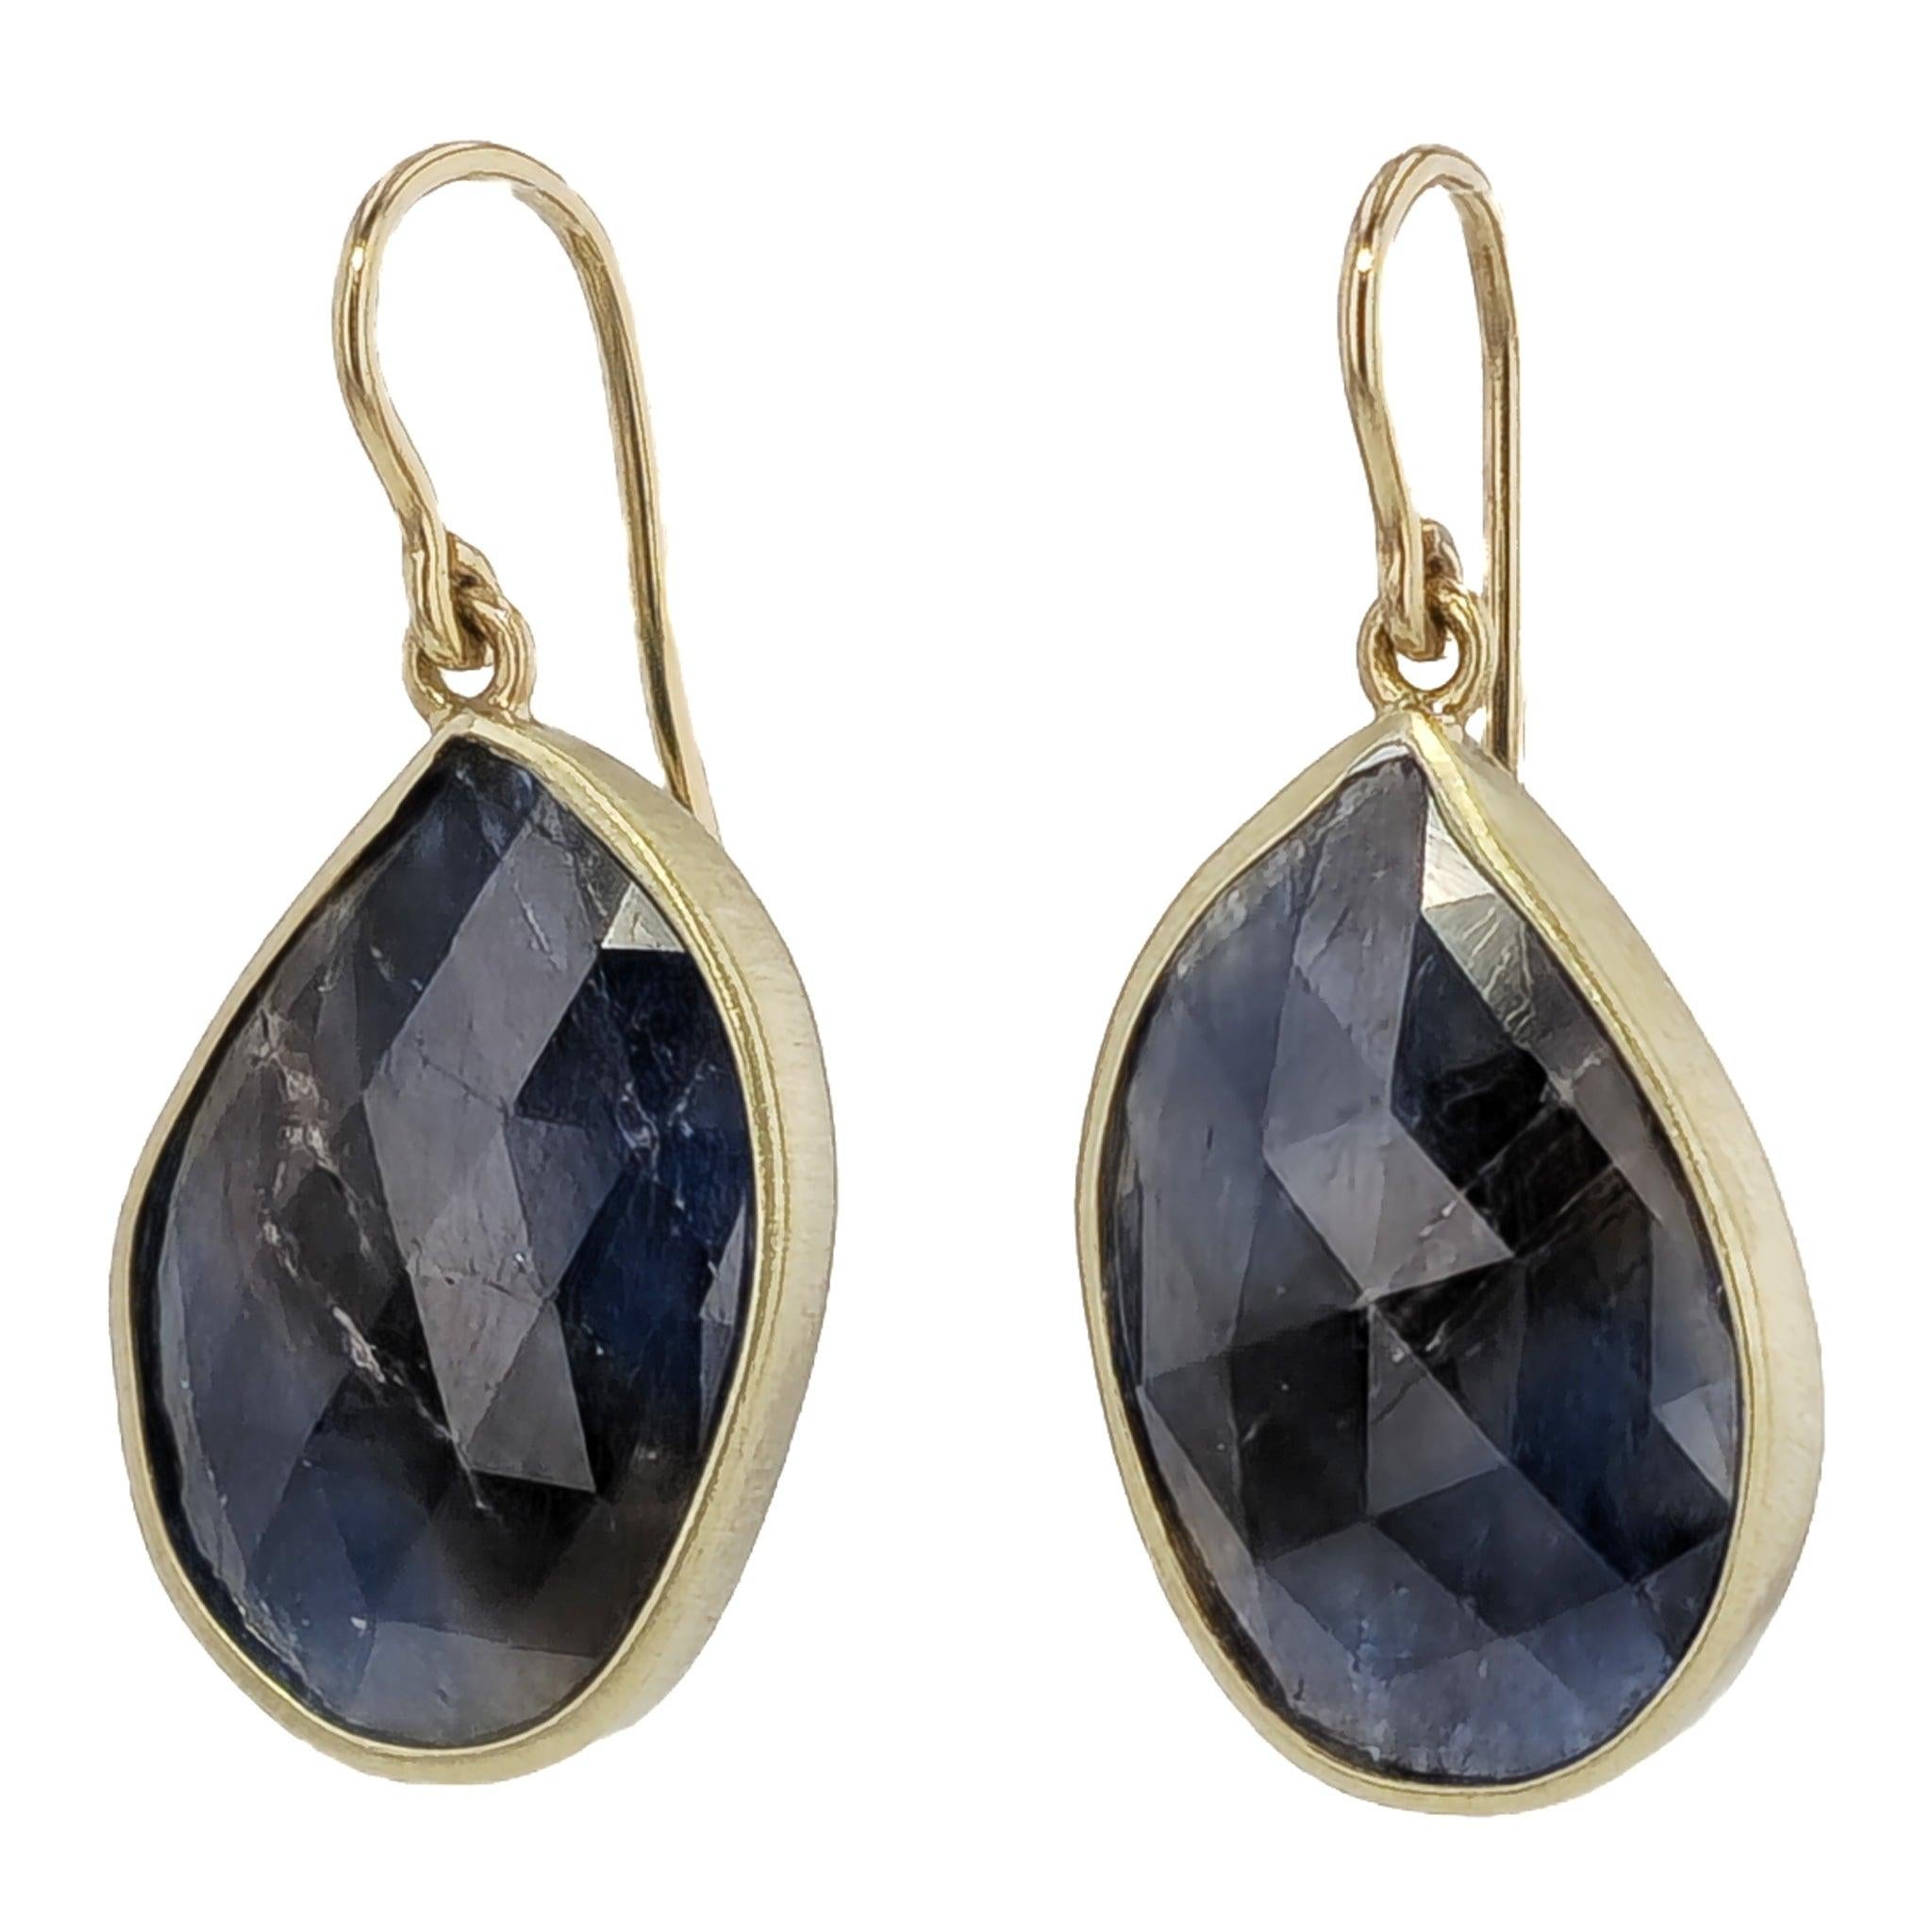 

Sapphires are meant to represent intelligence, education and the ability to make wise and good choices. The Sapphire was seen this way even back in the Ancient times because the Ancient Greeks used to wear this stone to attain Wisdom. The stone